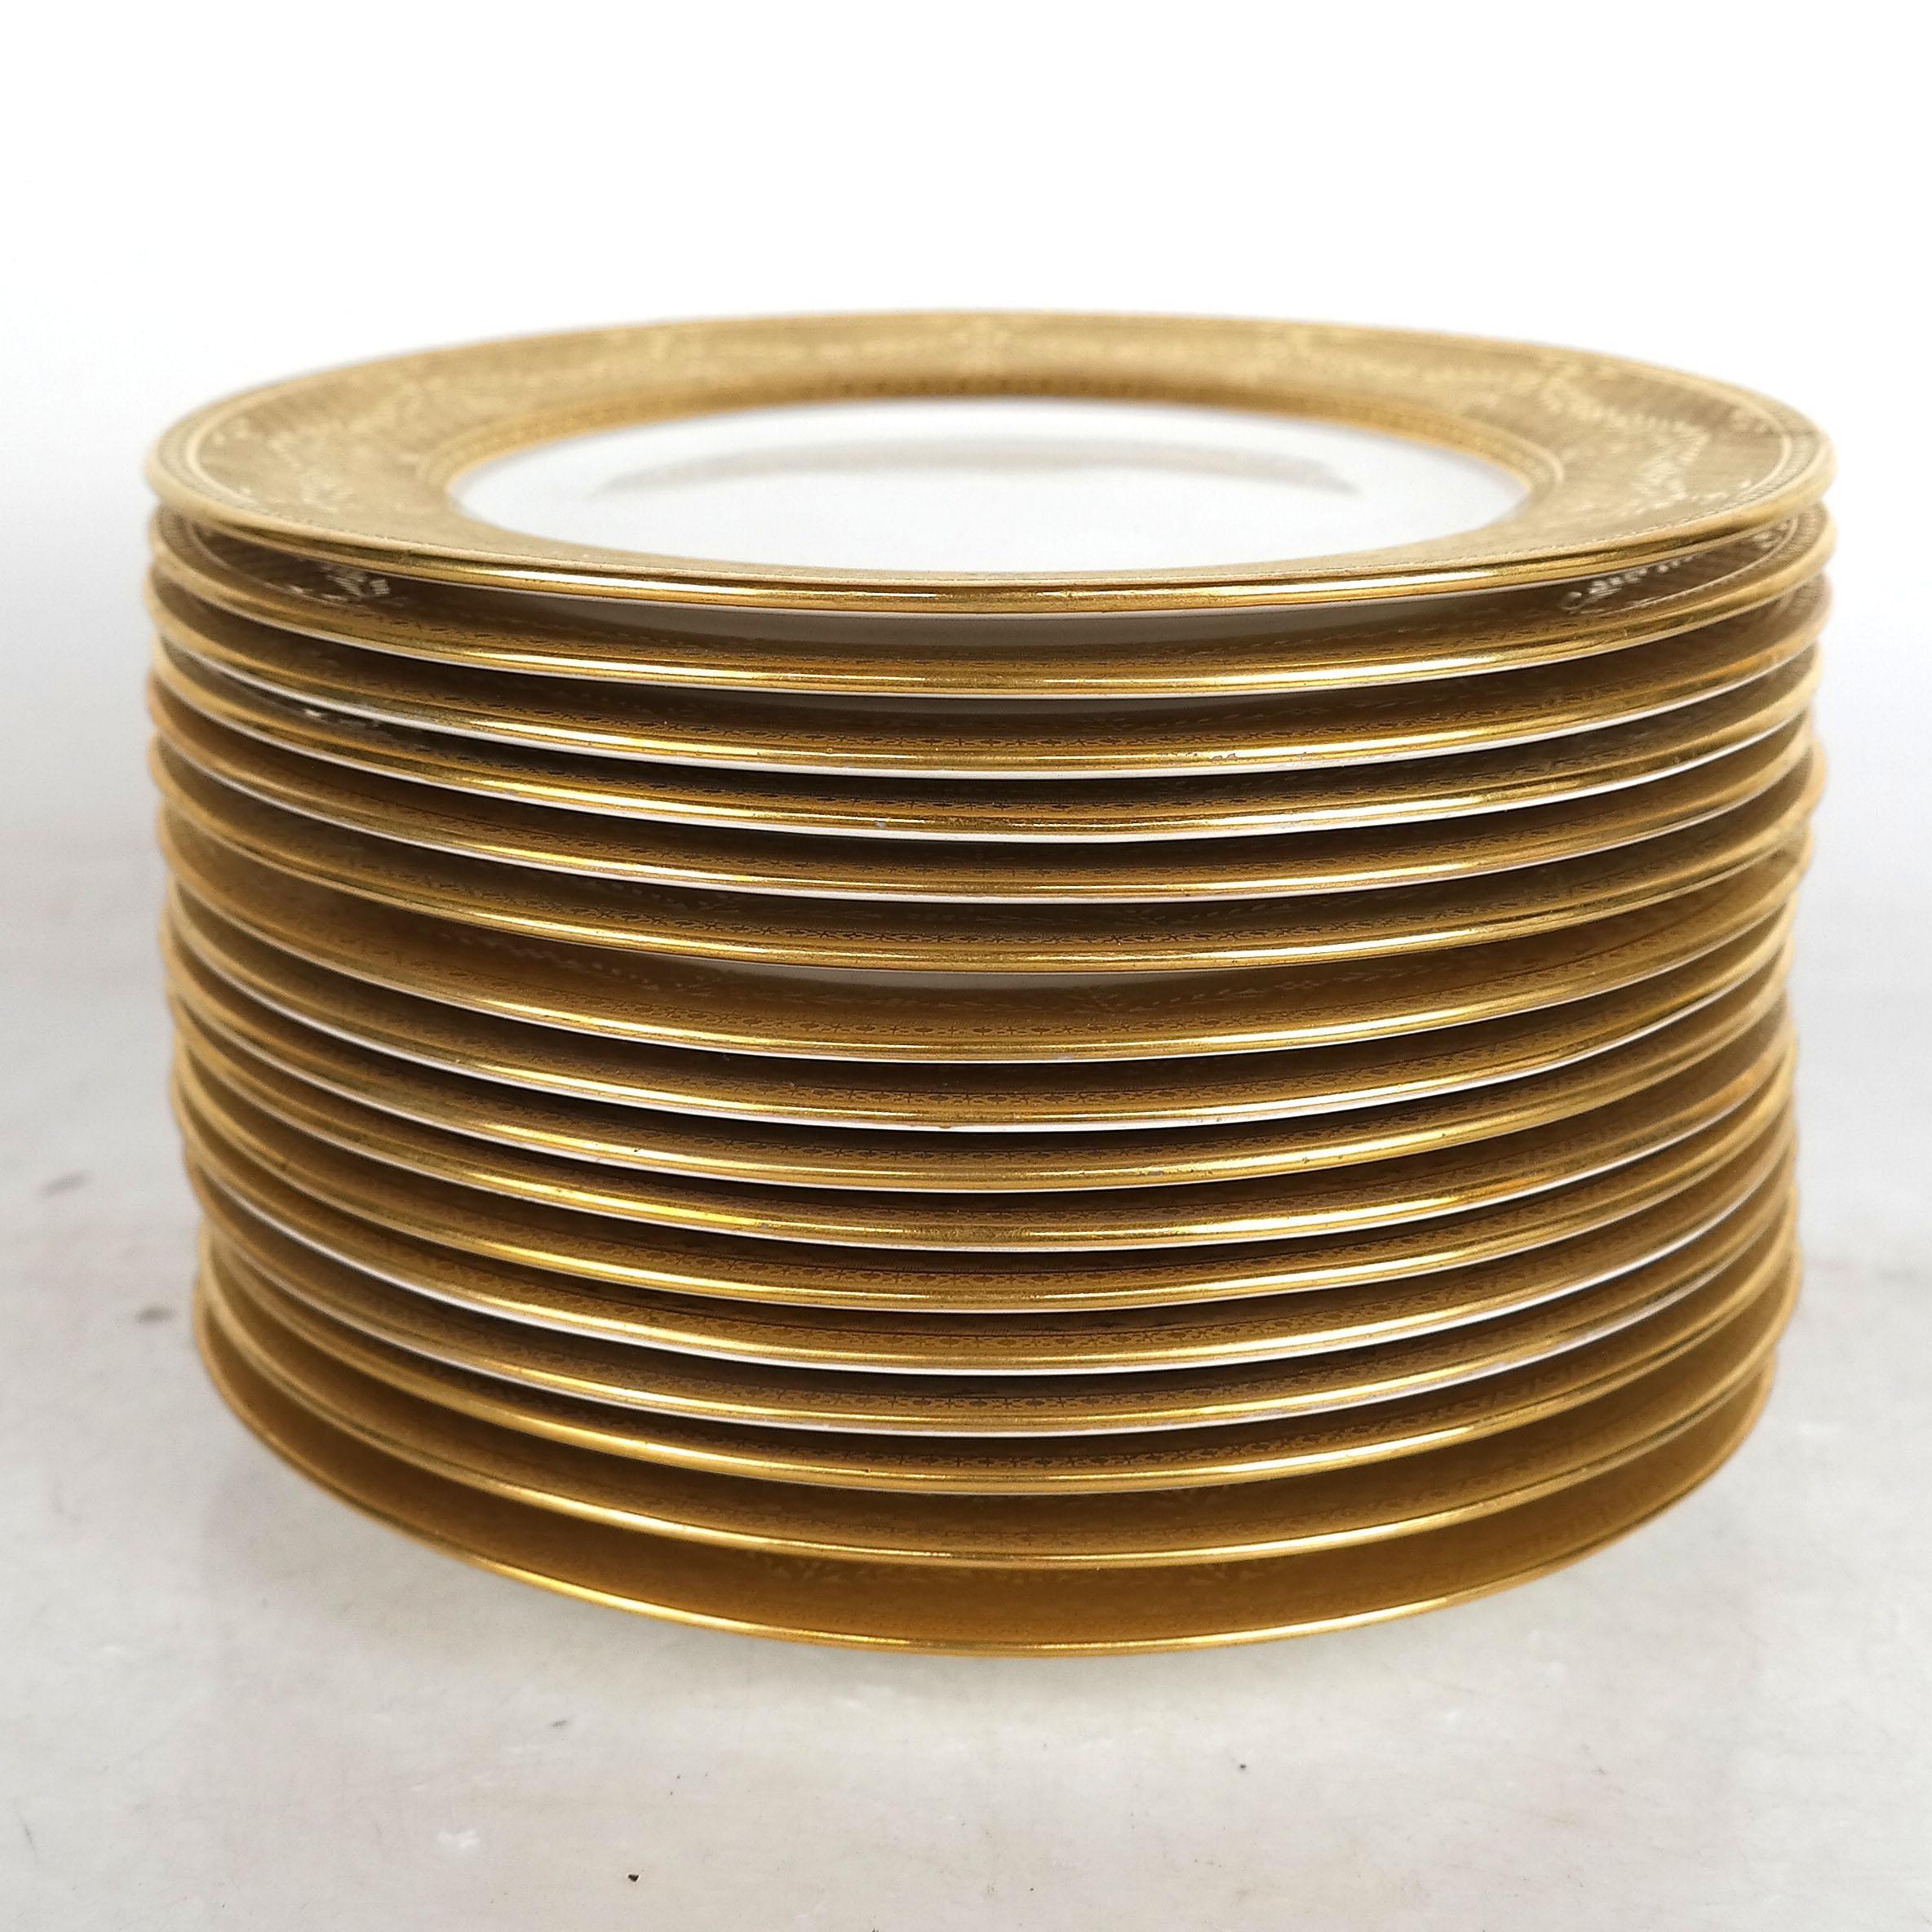 A fantastic set of dessert or first course plates with a nice wide collar of 24 karat acid etched gold banding. The perfect size you always need more of. These versatile gold and white plates will mix and match in nicely with all your fine tabletop.